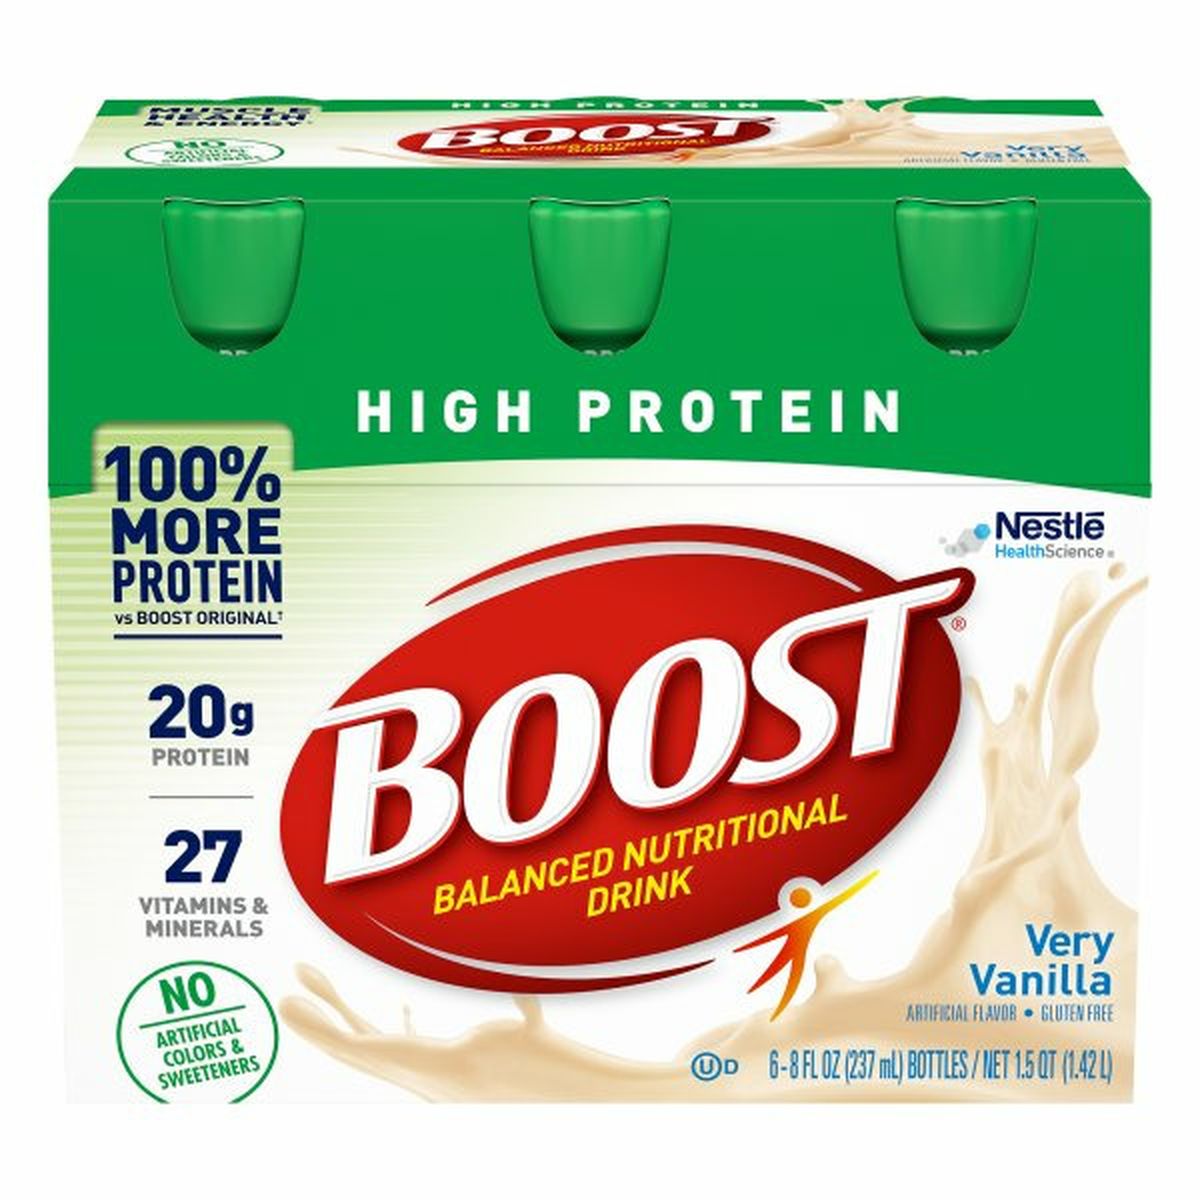 Calories in Boost Nutritional Drink, Balanced, Very Vanilla